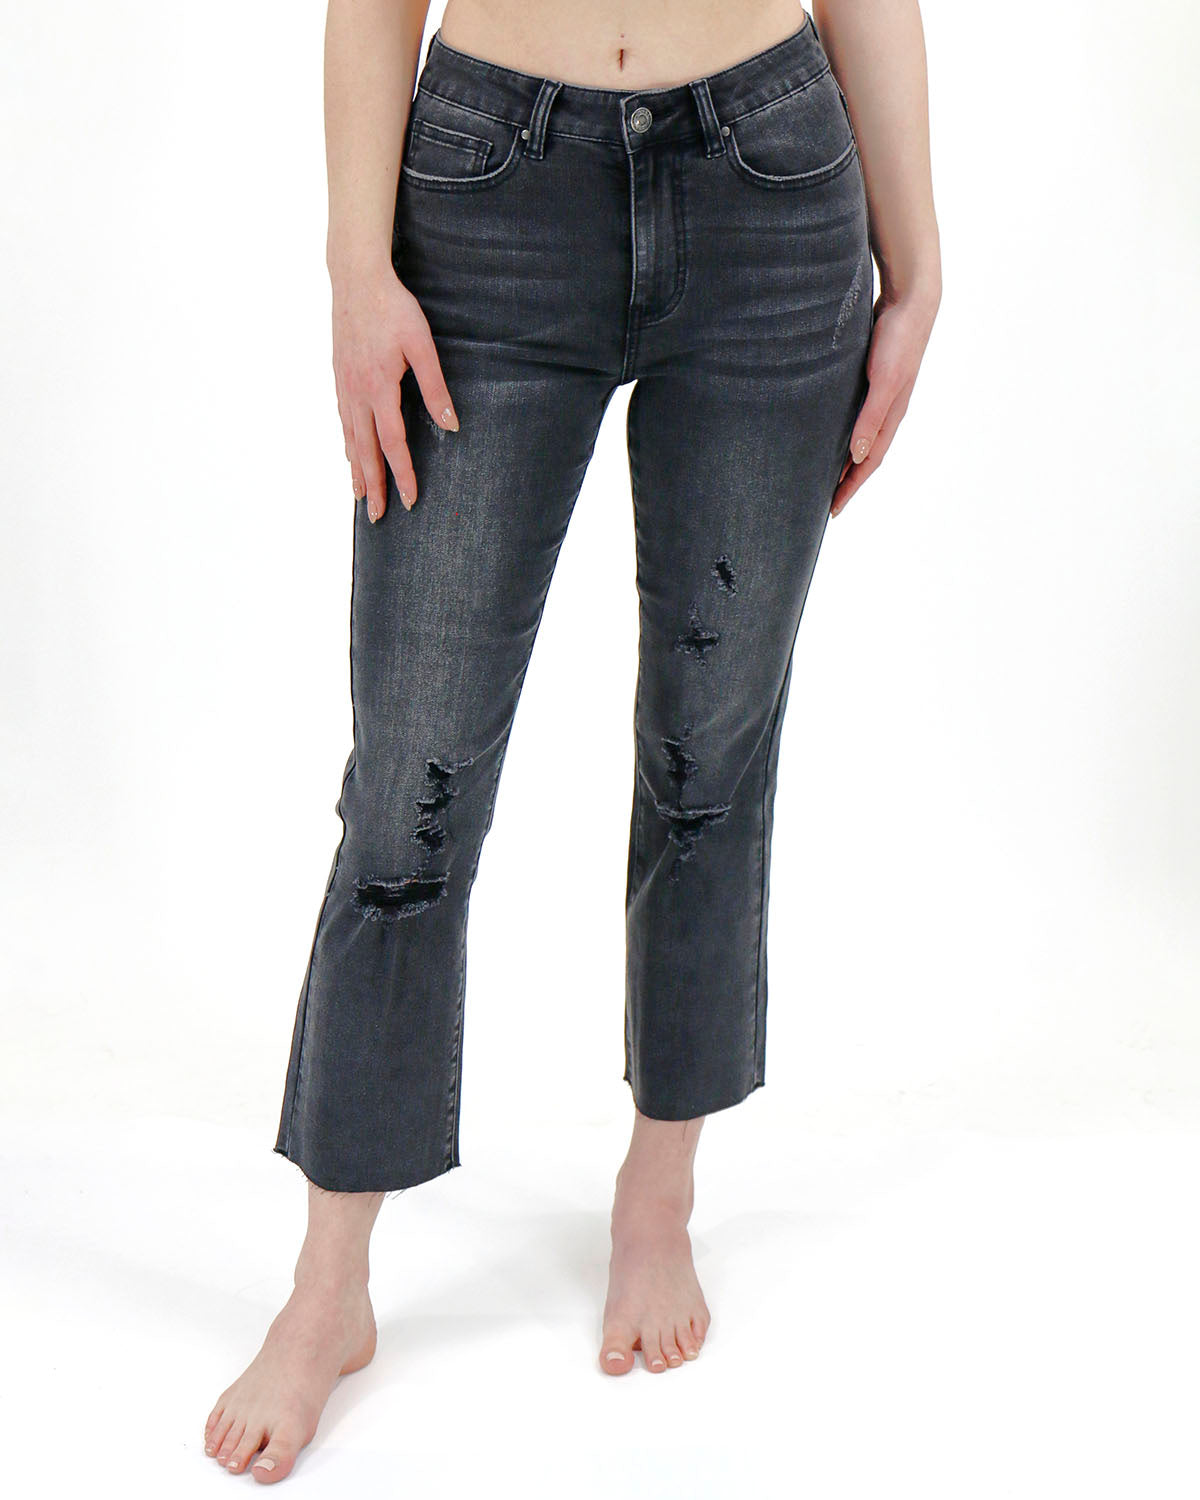 Mel's Fav Distressed Straight Cropped Denim - Mid wash - Grace and Lace